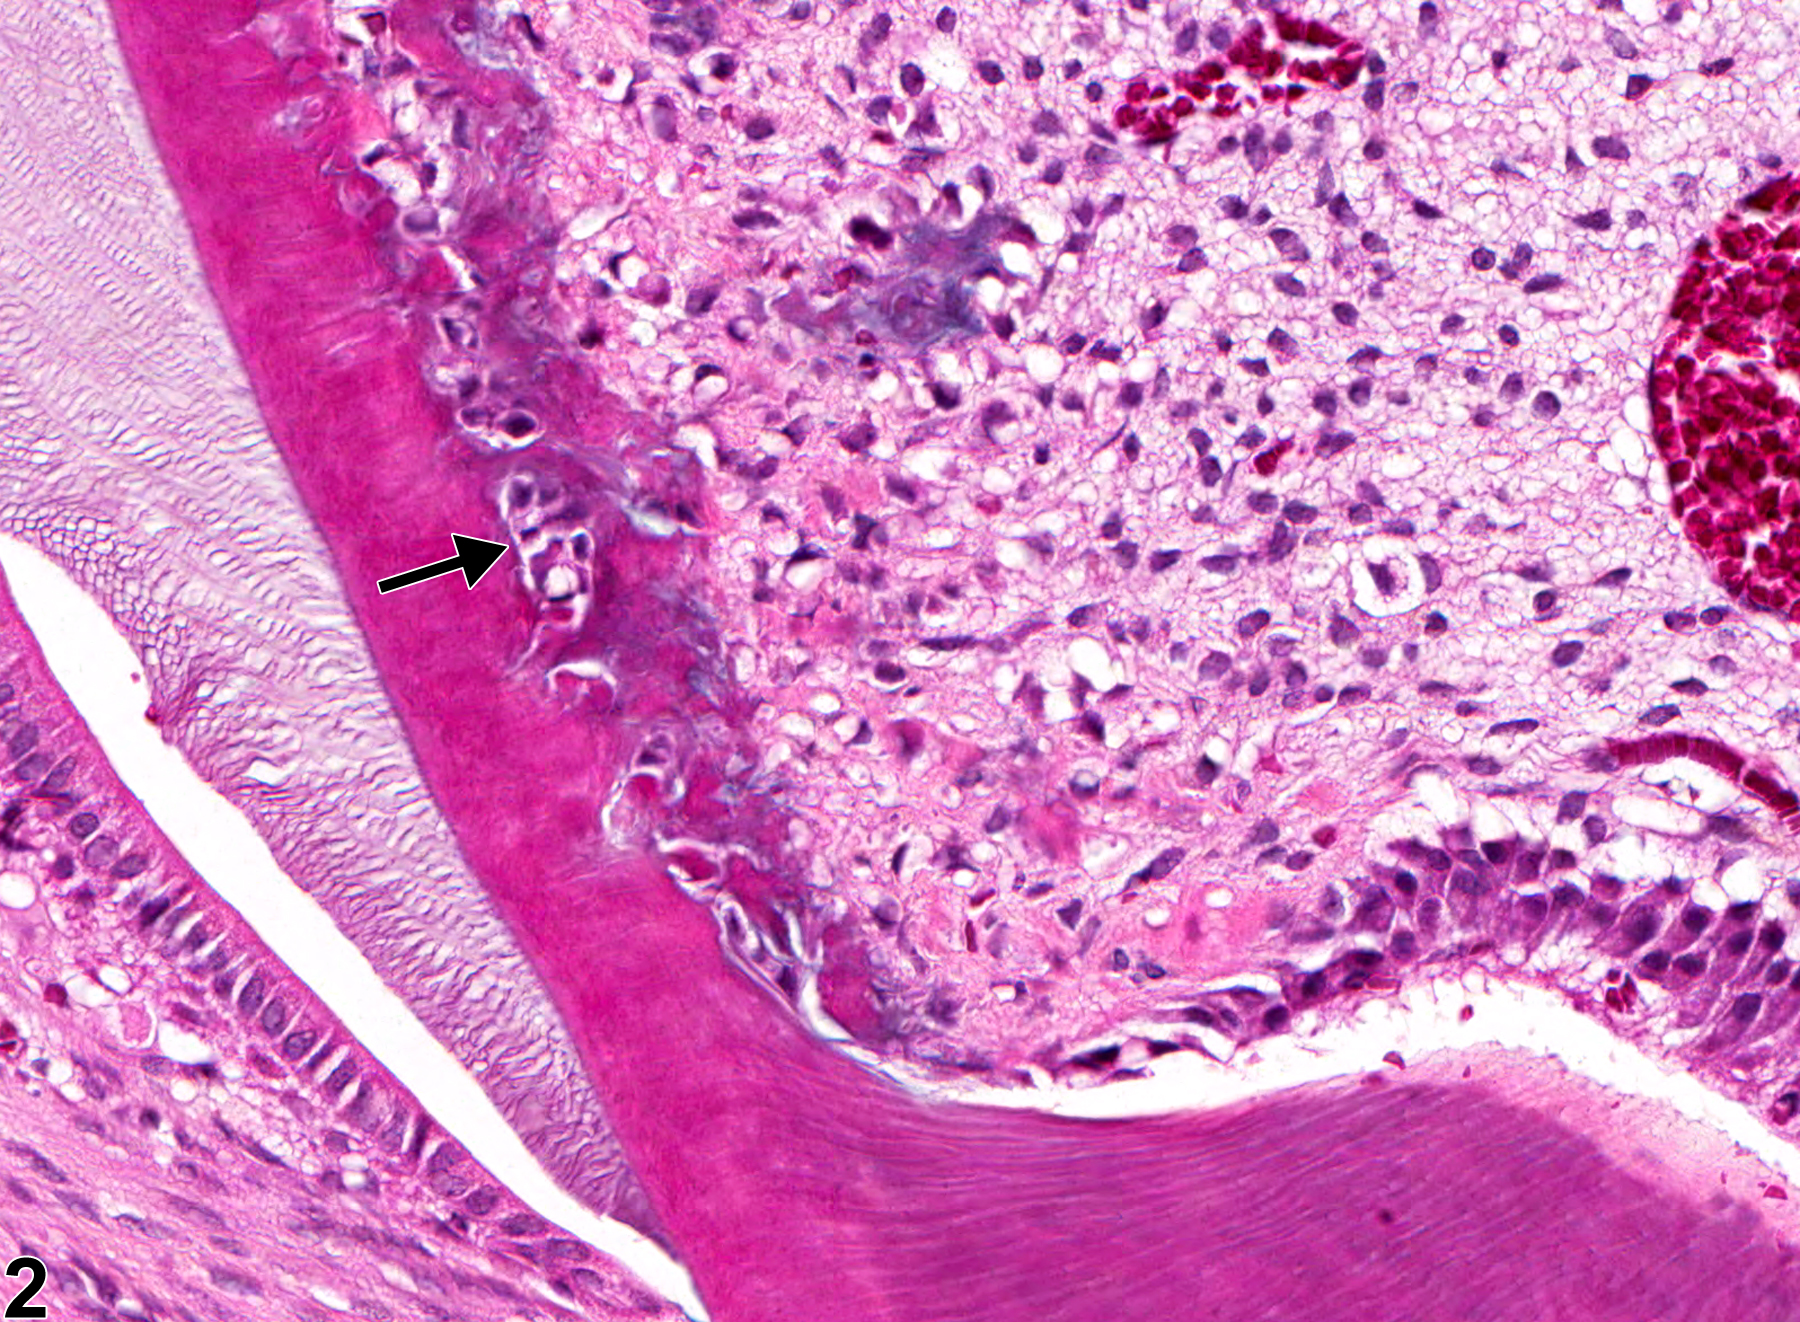 Image of degeneration in the tooth from a female HSD rat in a subchronic study